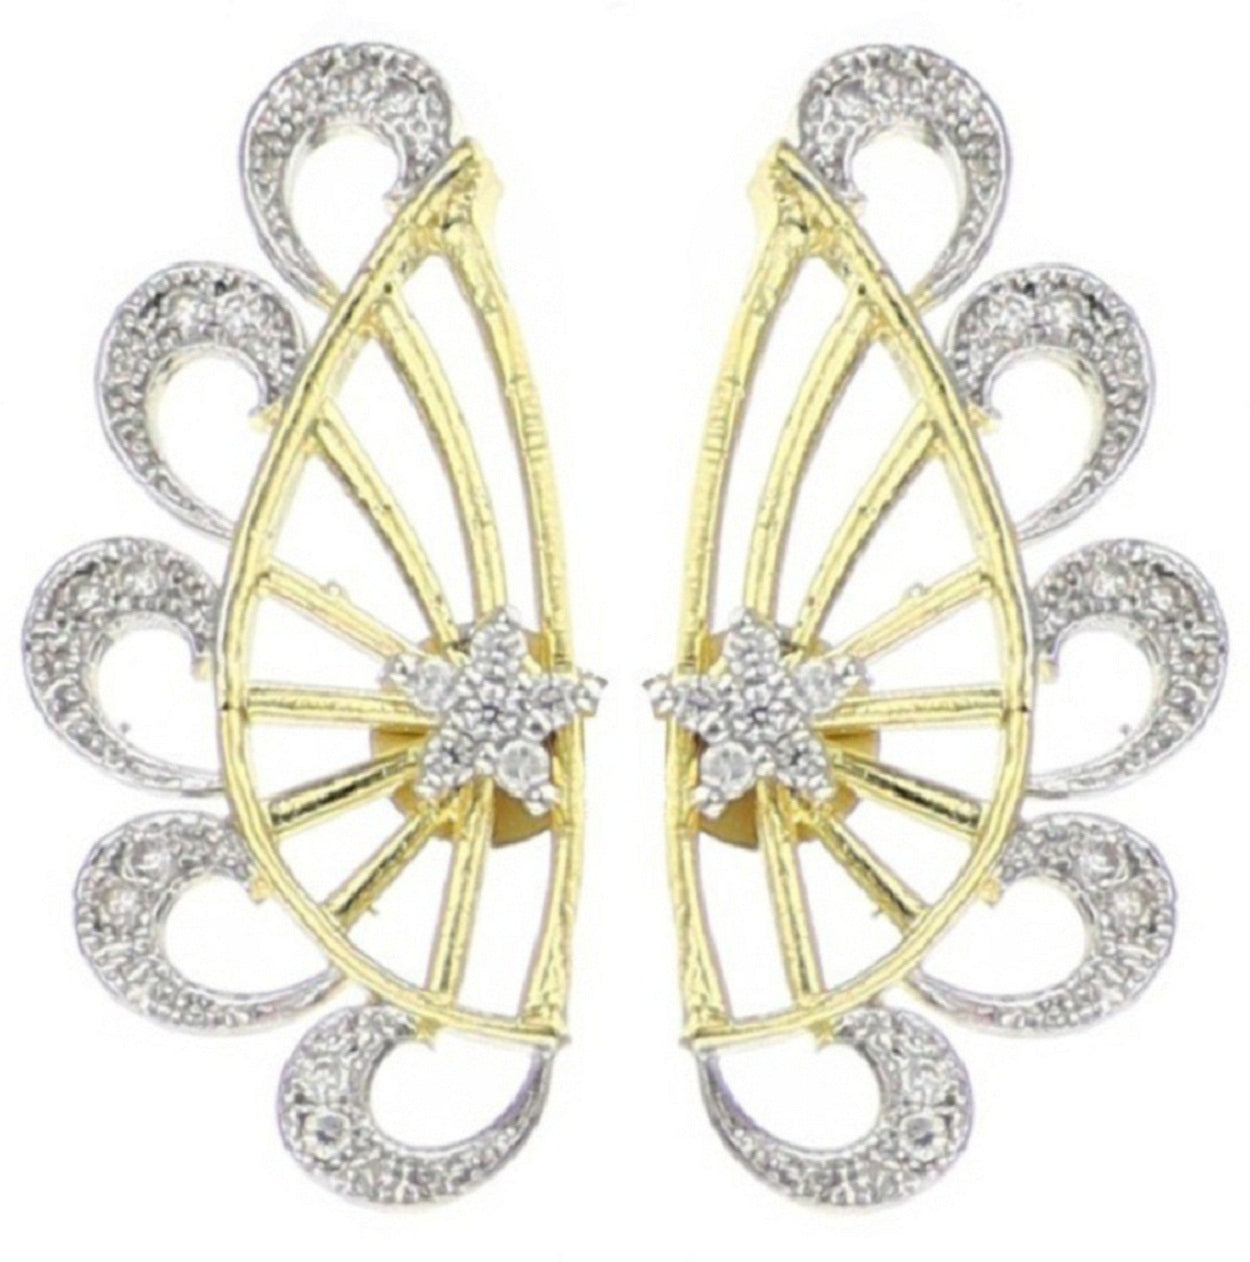 Attractive Golden Plated American Diamond Studd Earring Set for Women and Girls